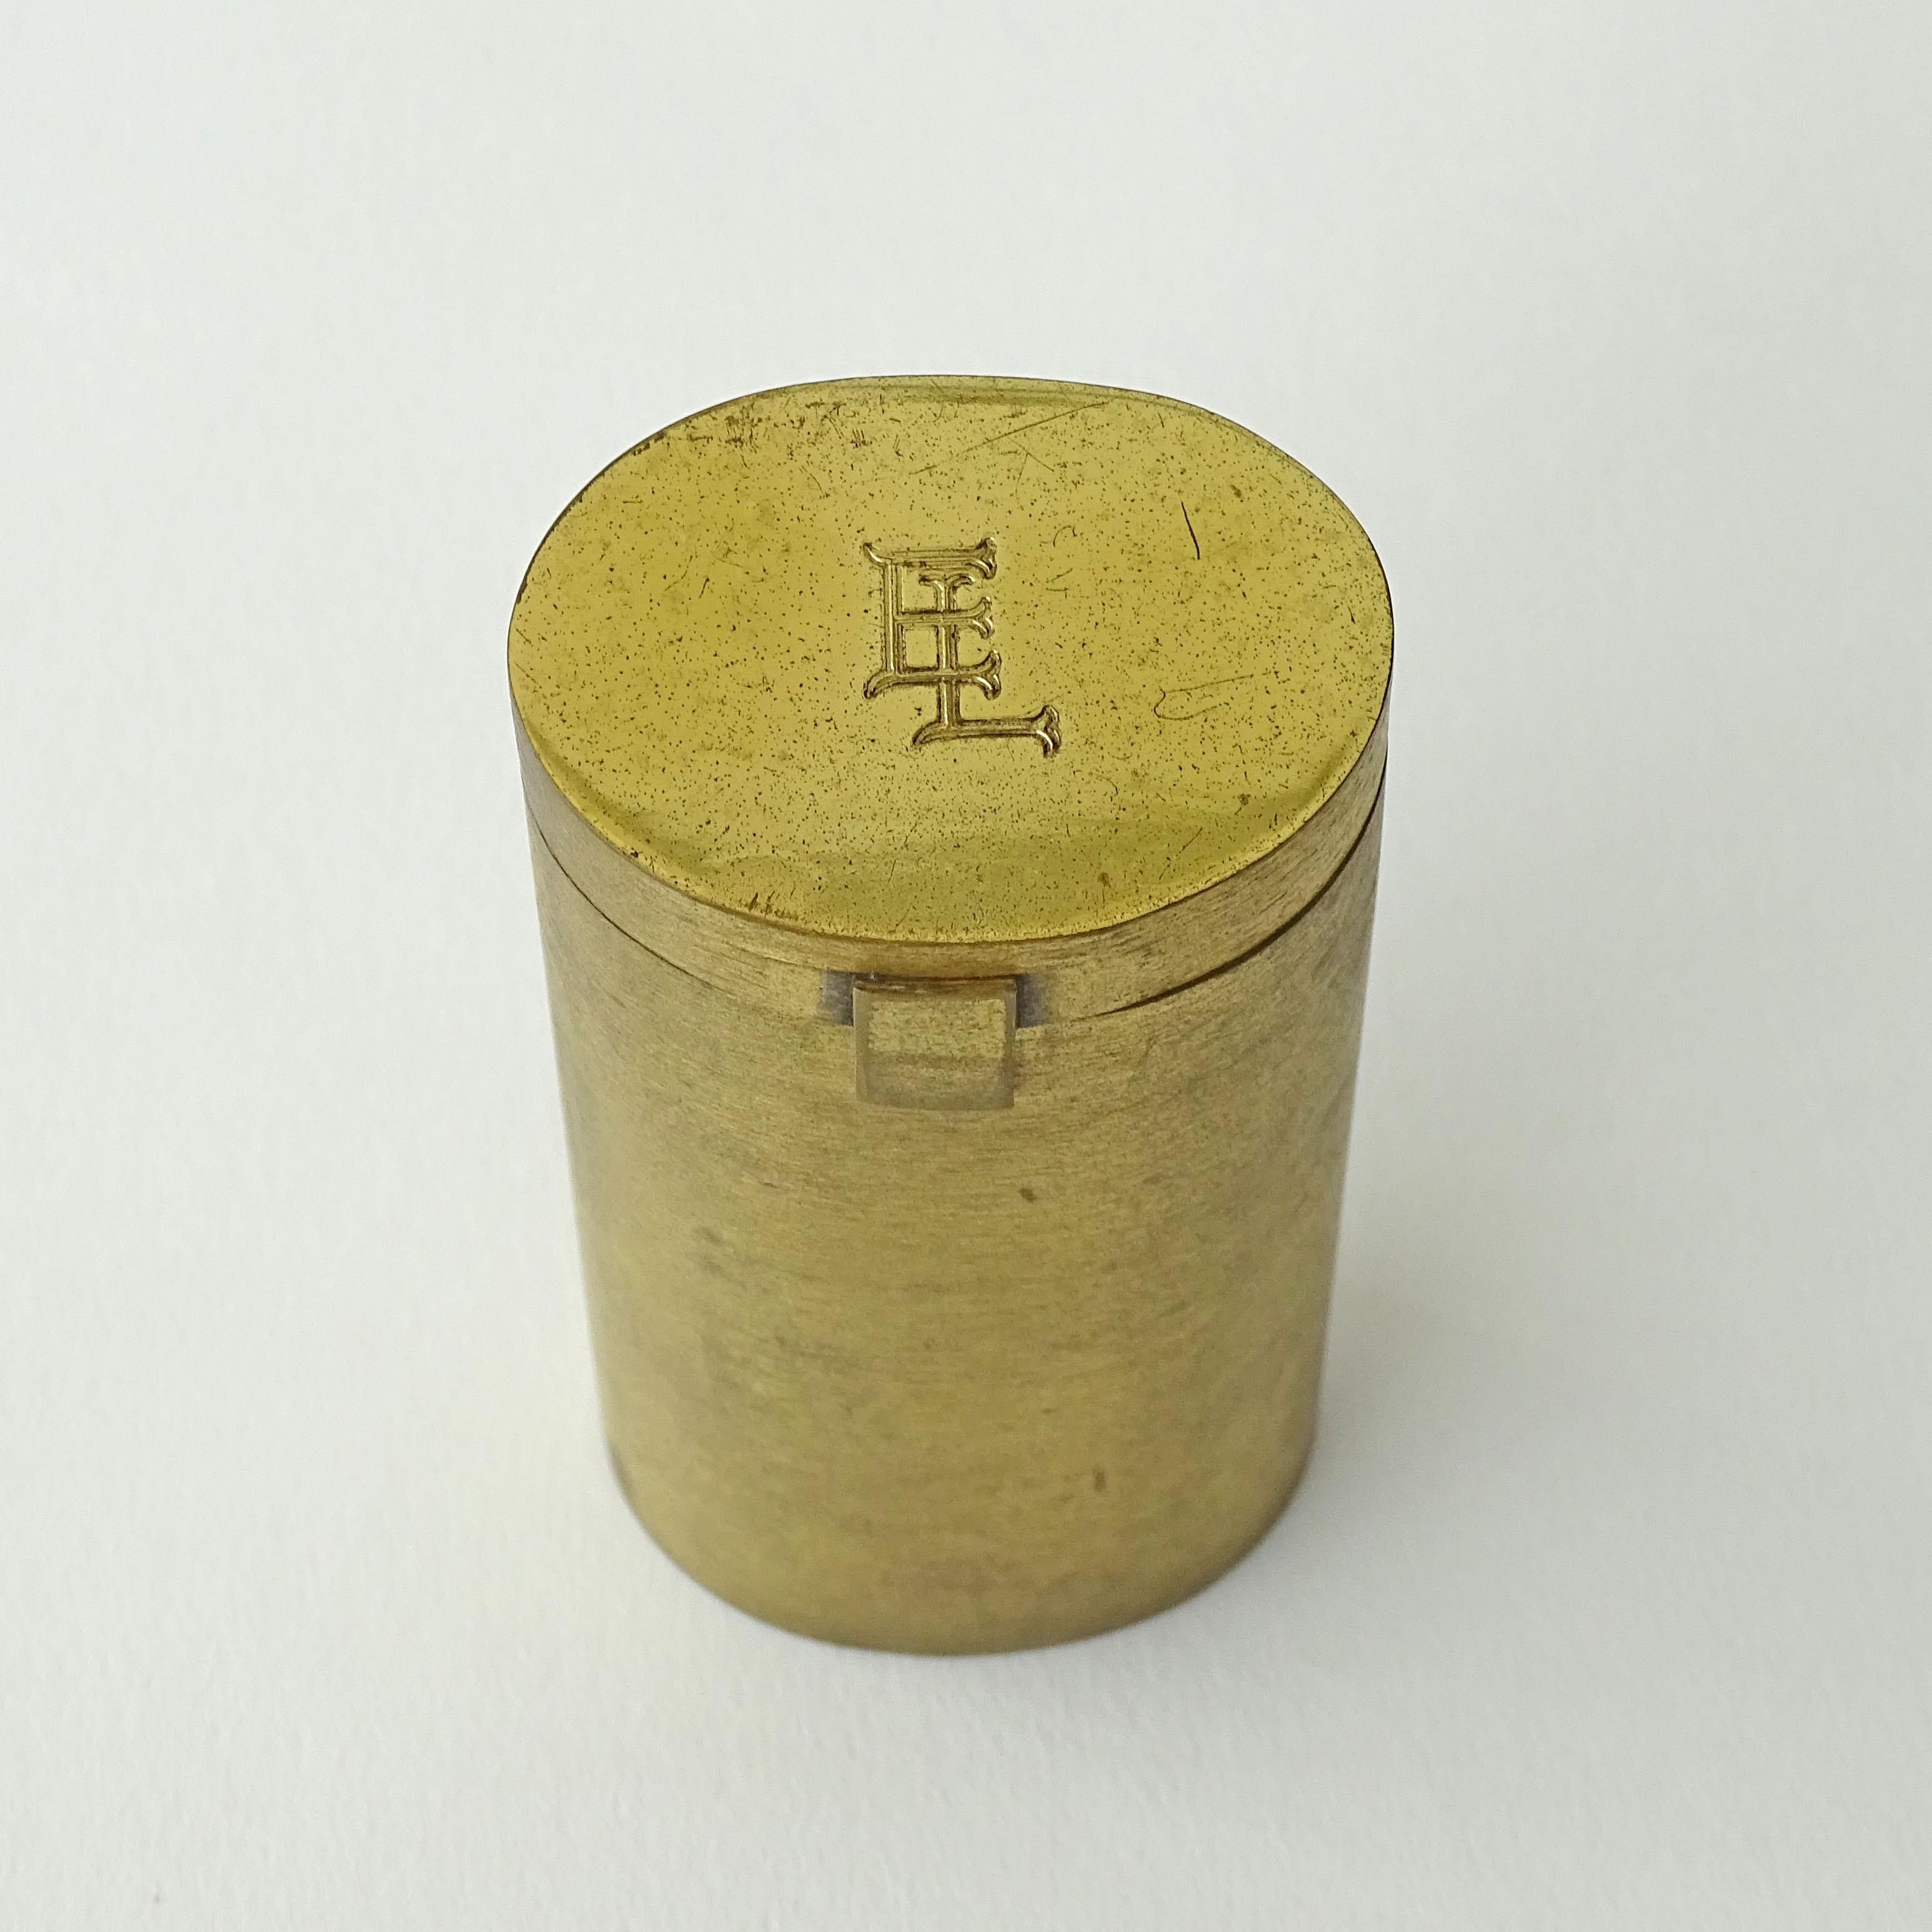 Gabriella Crespi Small Brass Container Box.
Italy 1970s
Carries the Initials E.L.
Signed at the base Gabriella Crespi.